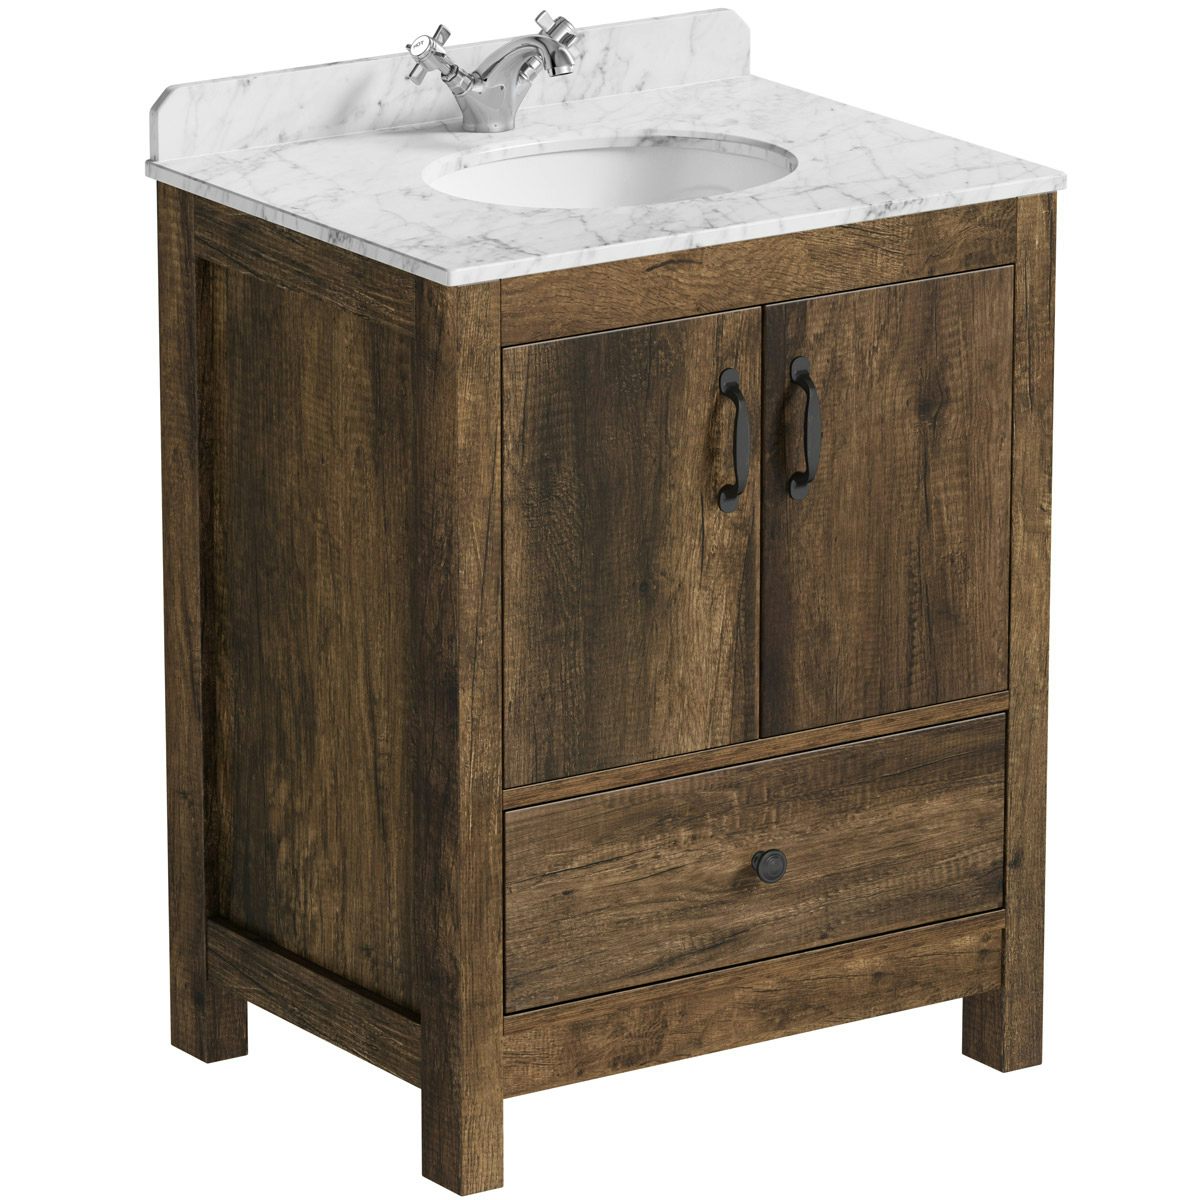 The Bath Co Dalston Floorstanding, Wooden Vanity Unit Without Sink